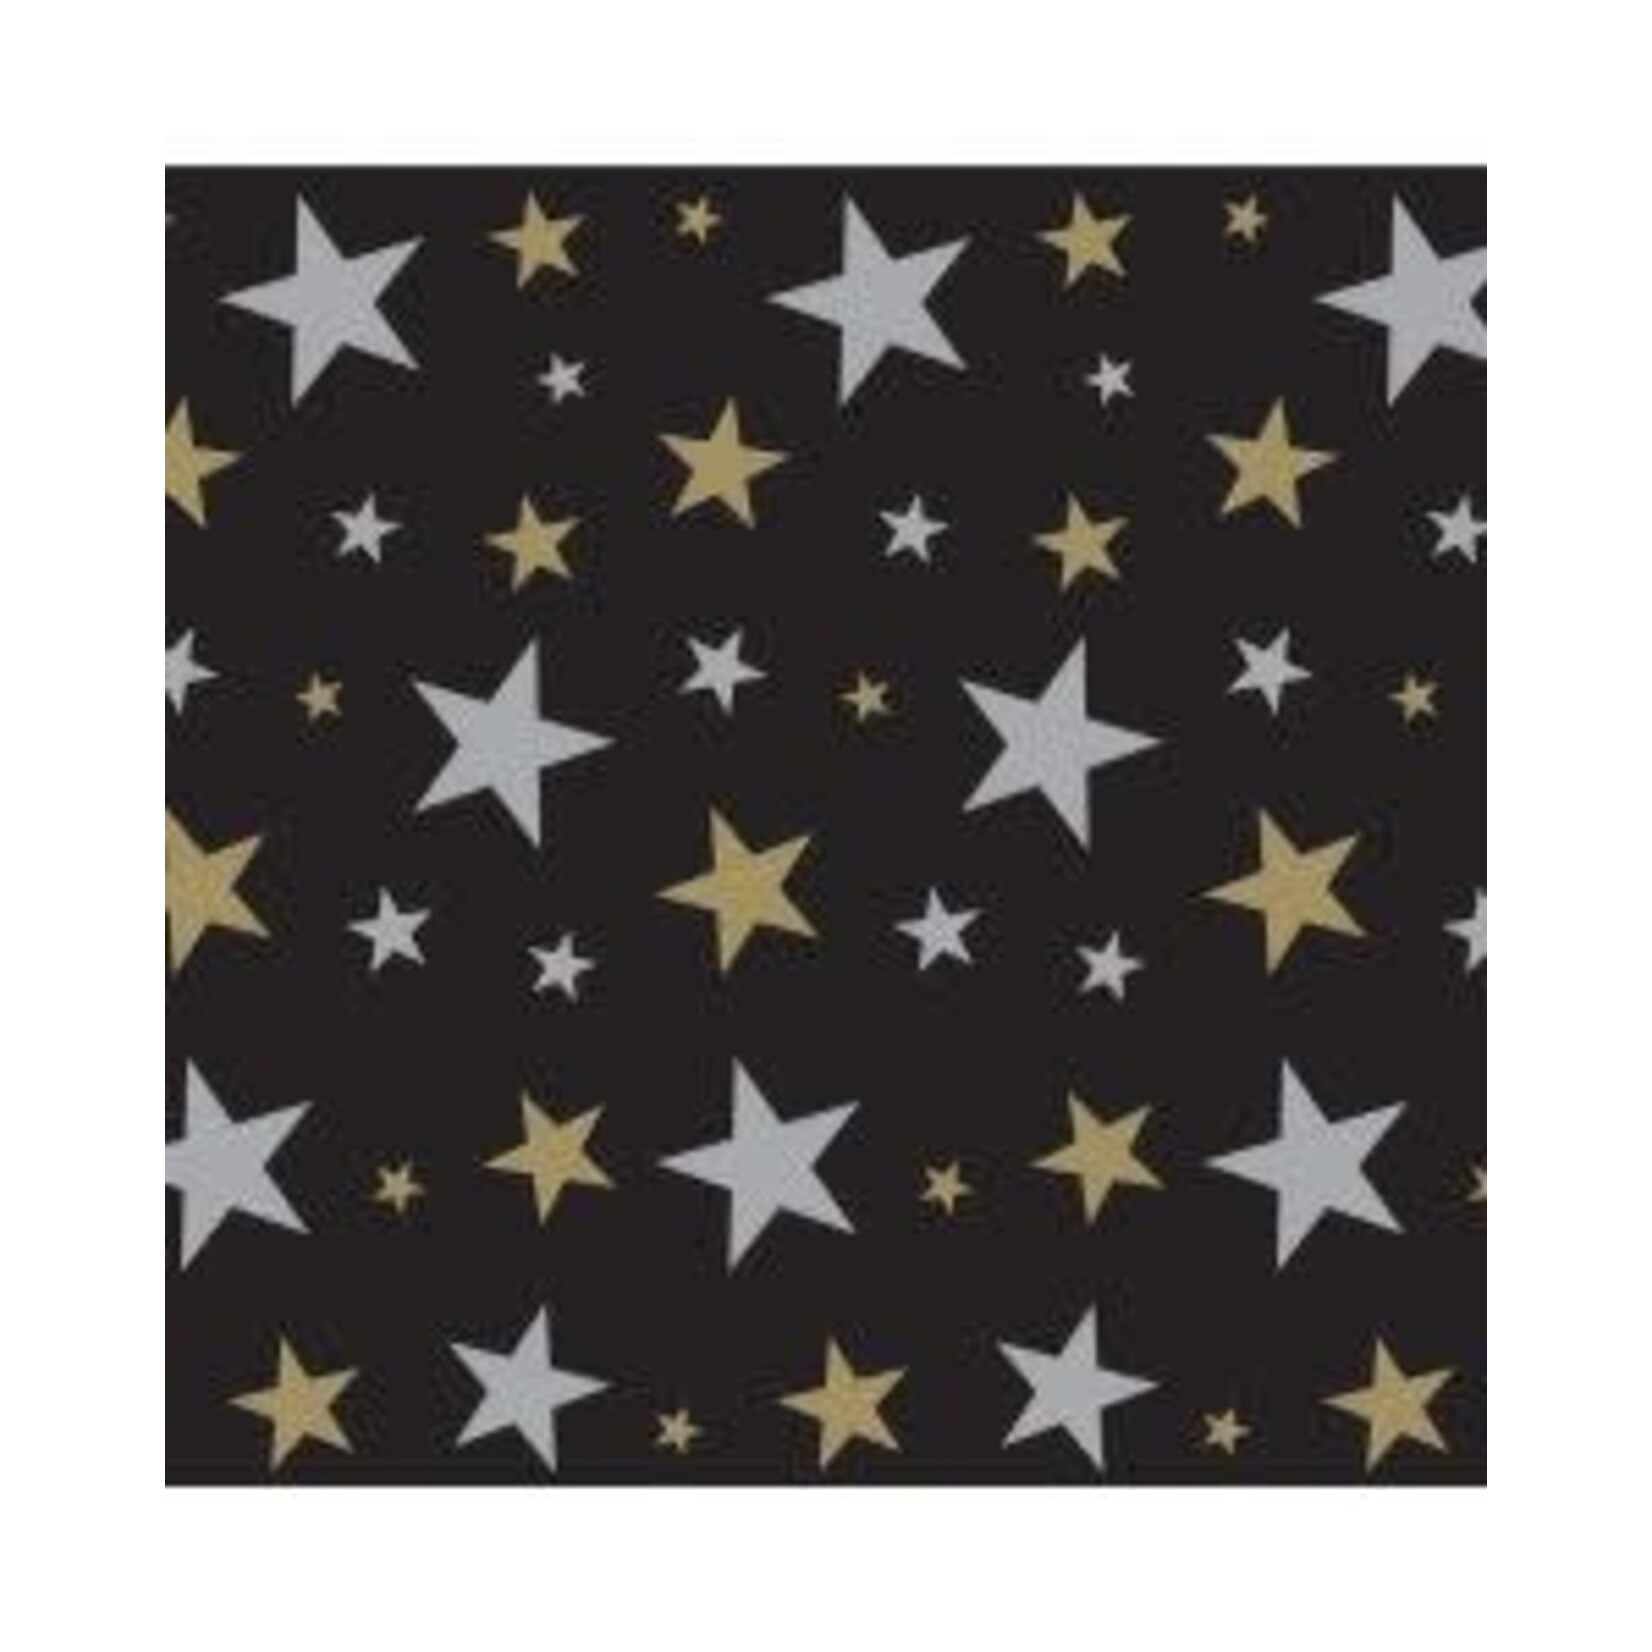 Beistle Black & Gold Star Picture Backdrop - 1ct. (4' x 30')